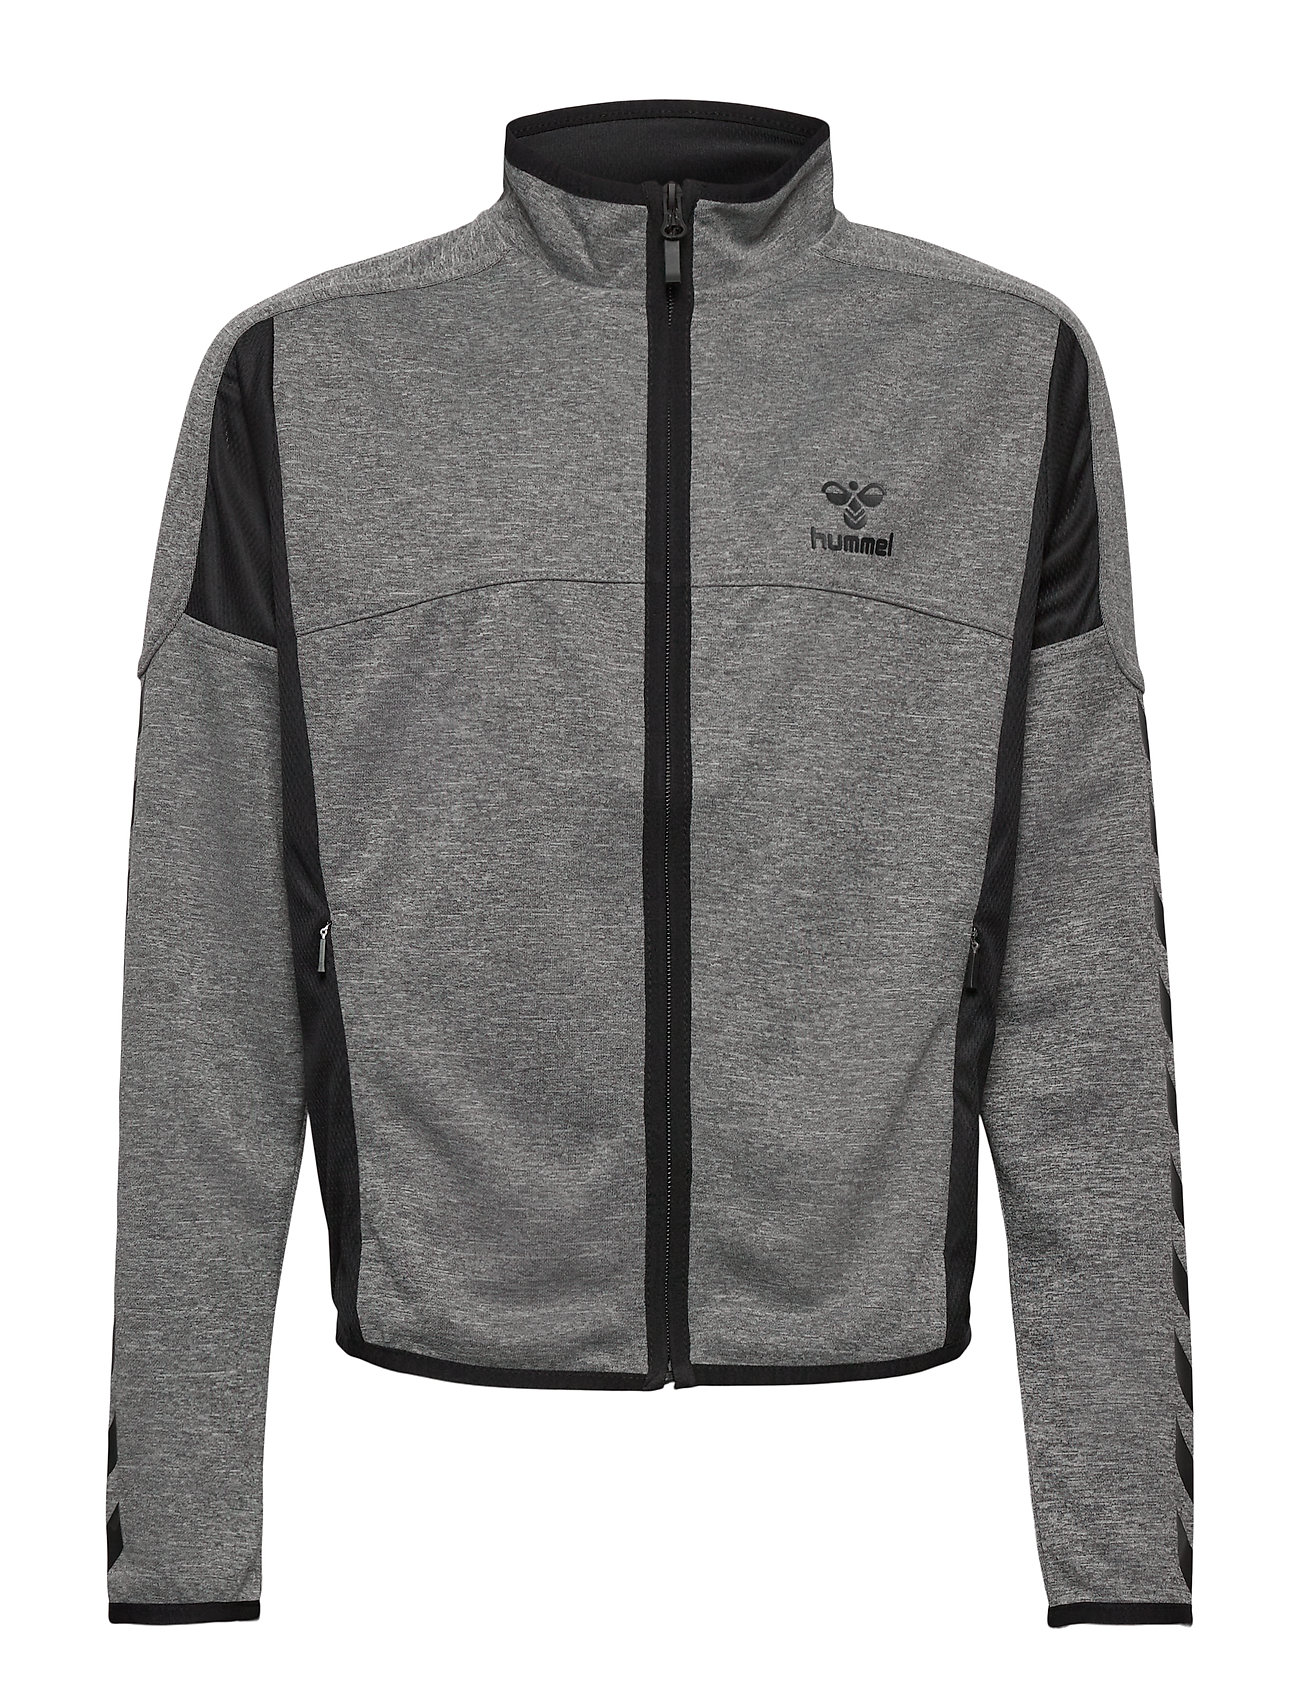 Hummel Classic Bee Phi Zip Jacket (Dark Grey (21.92 | Large of outlet-styles Booztlet.com